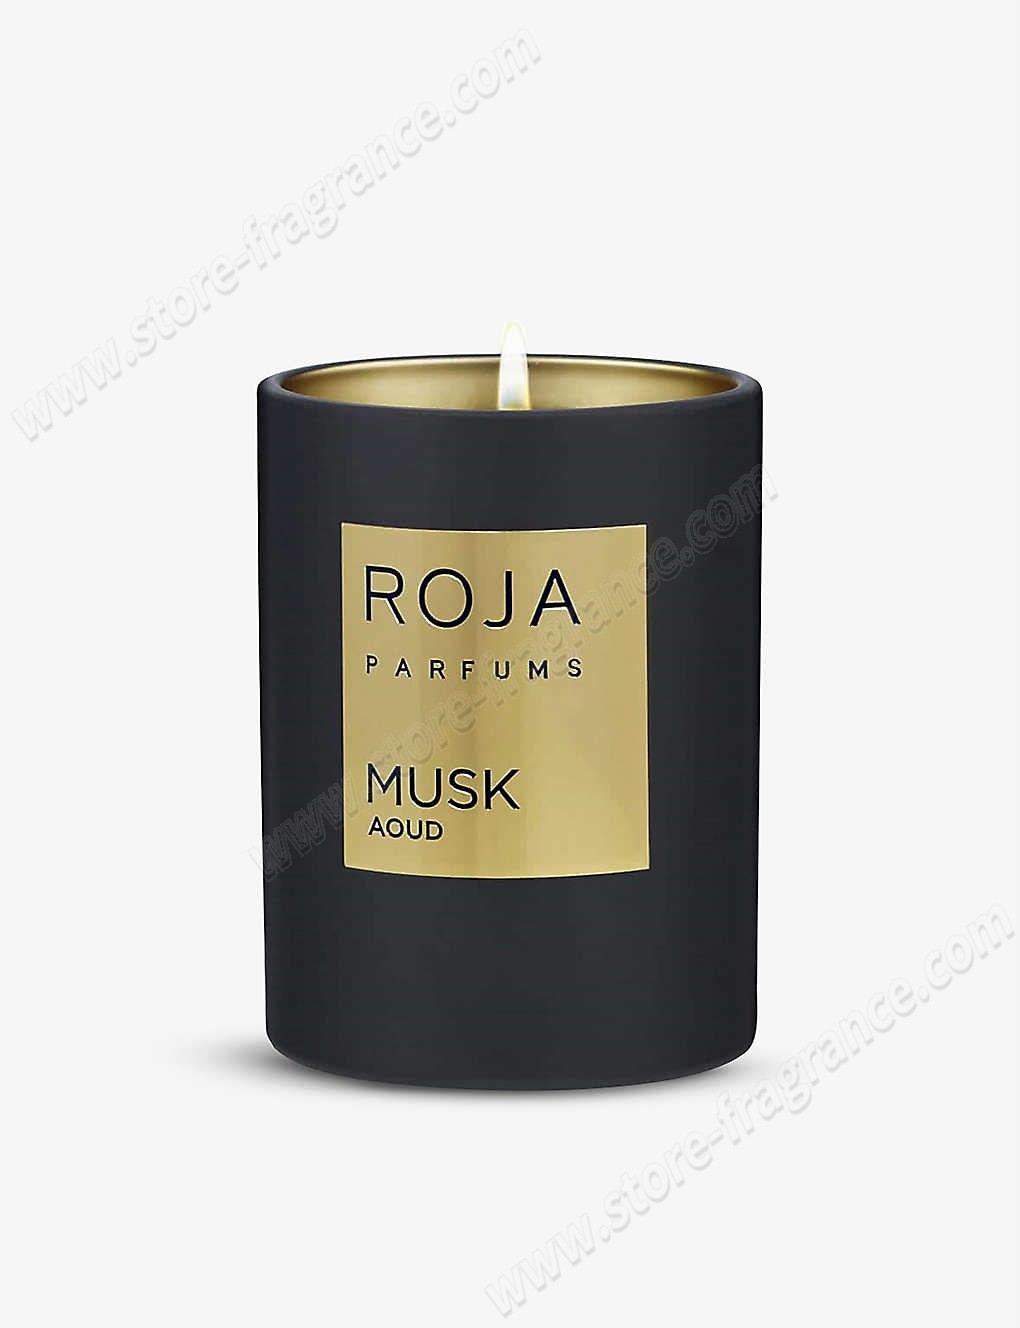 ROJA PARFUMS/Musk Aoud scented candle 300g ✿ Discount Store - -0